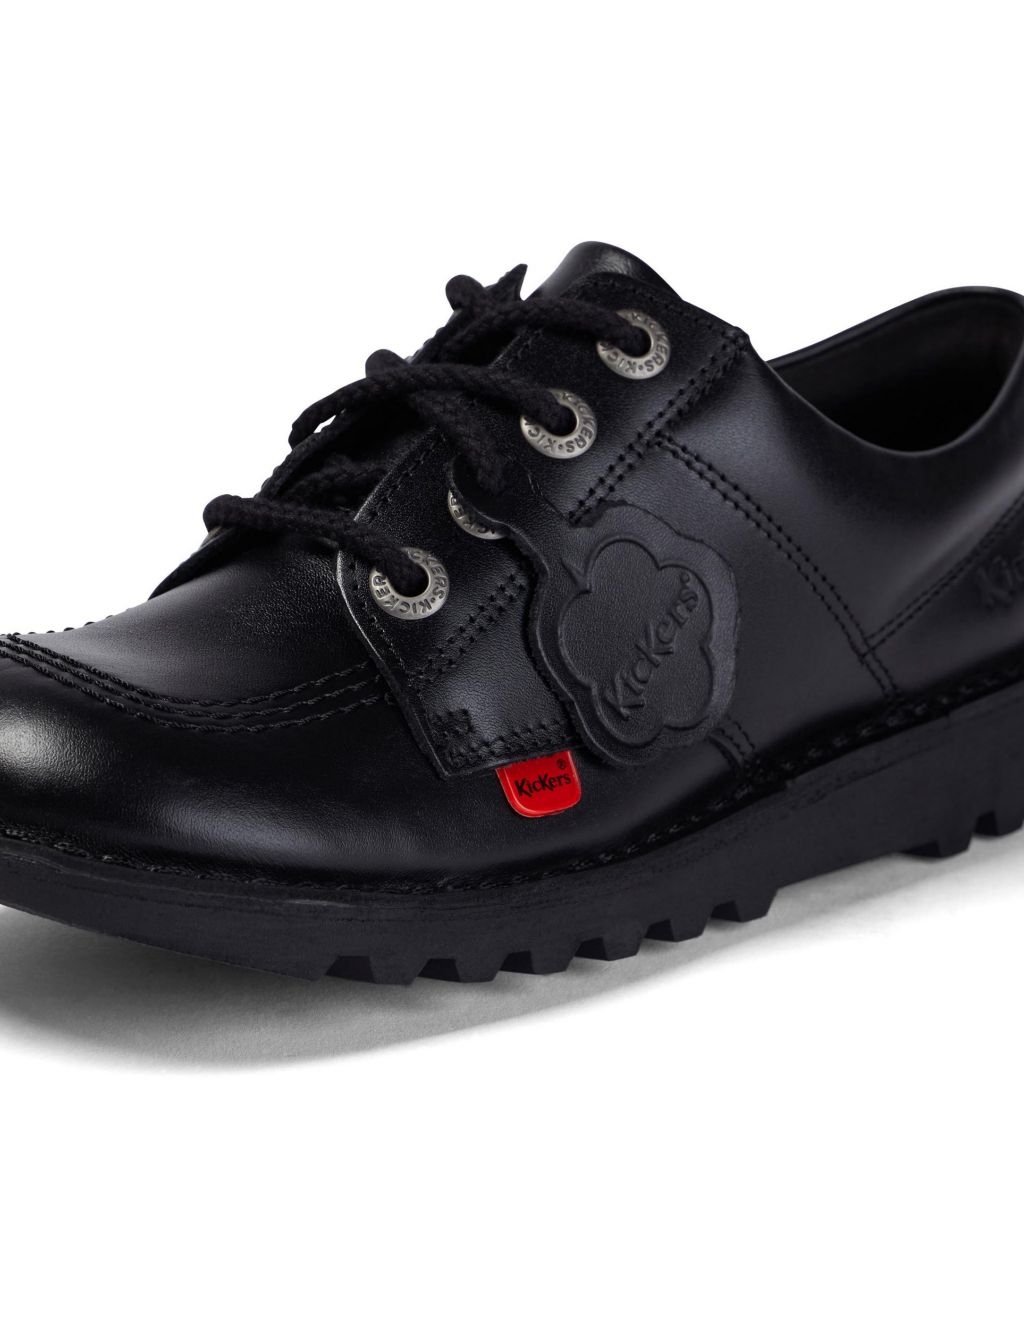 Kids' Leather Lace School Shoes image 2